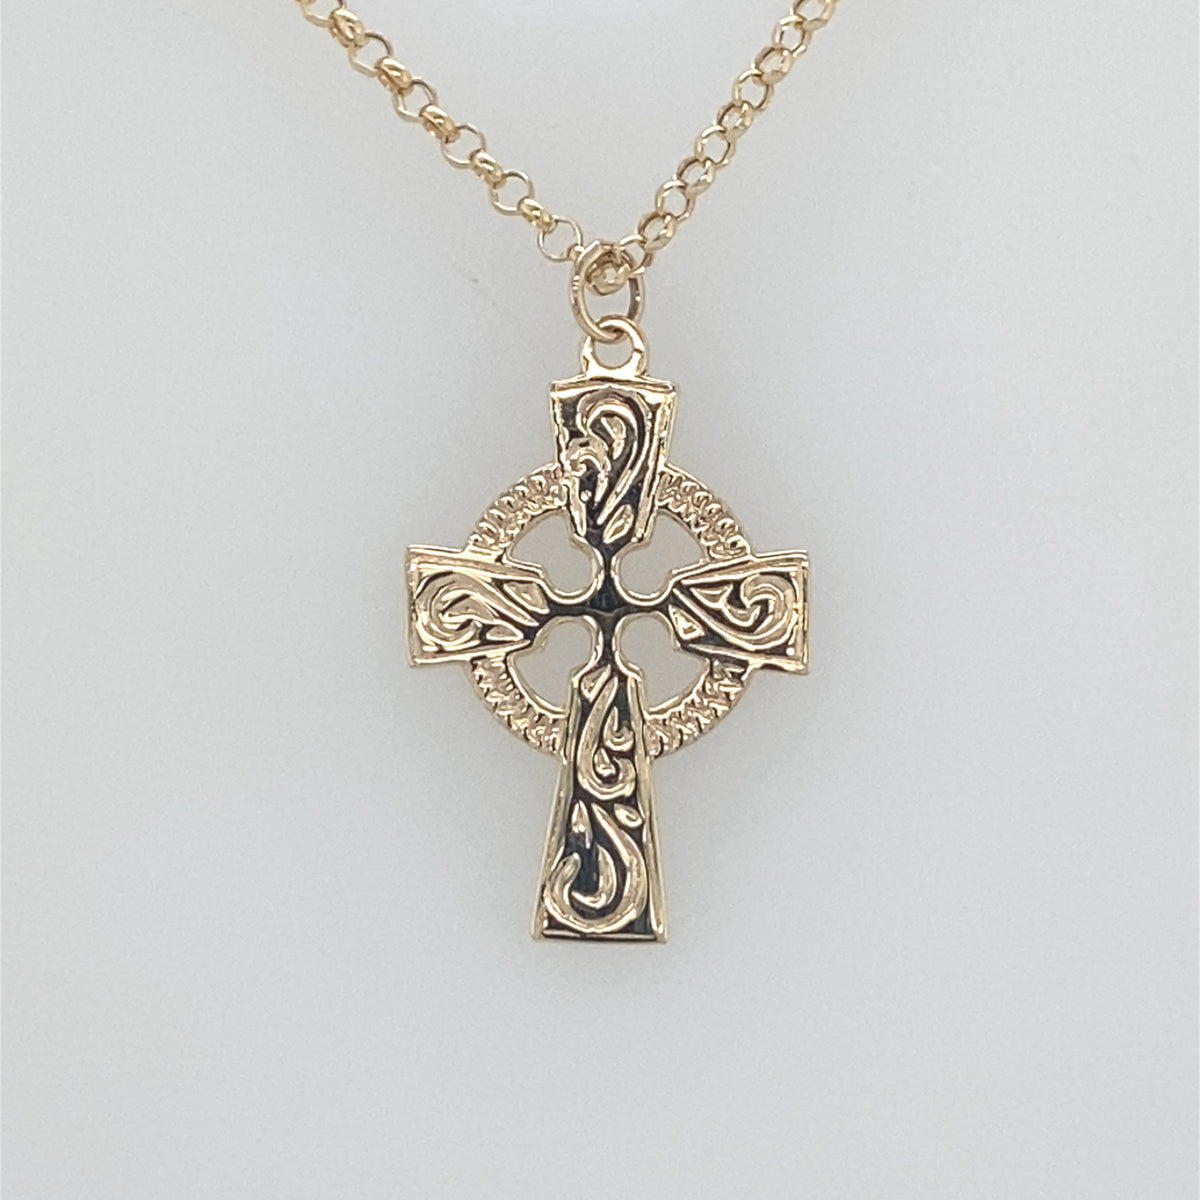 9kt Gold Celtic Cross and Chain